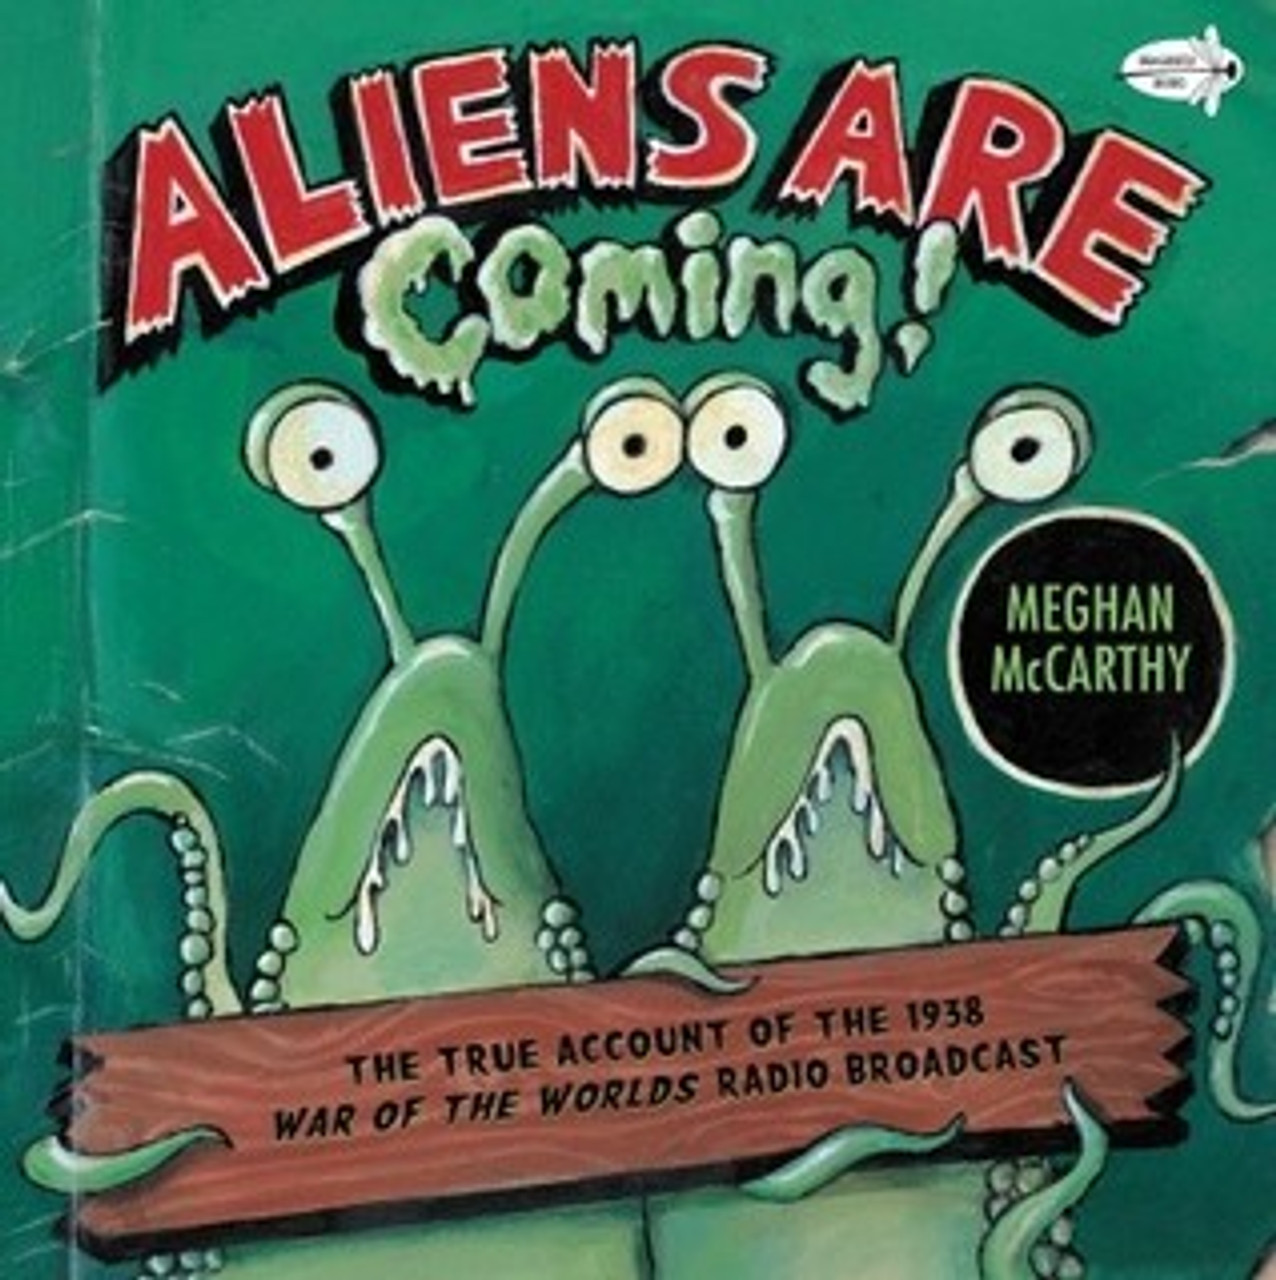 Meghan Mccarthy / Aliens are Coming!: The True Account of the 1938 War of the Worlds Radio Broadcast (Children's Picture Book)